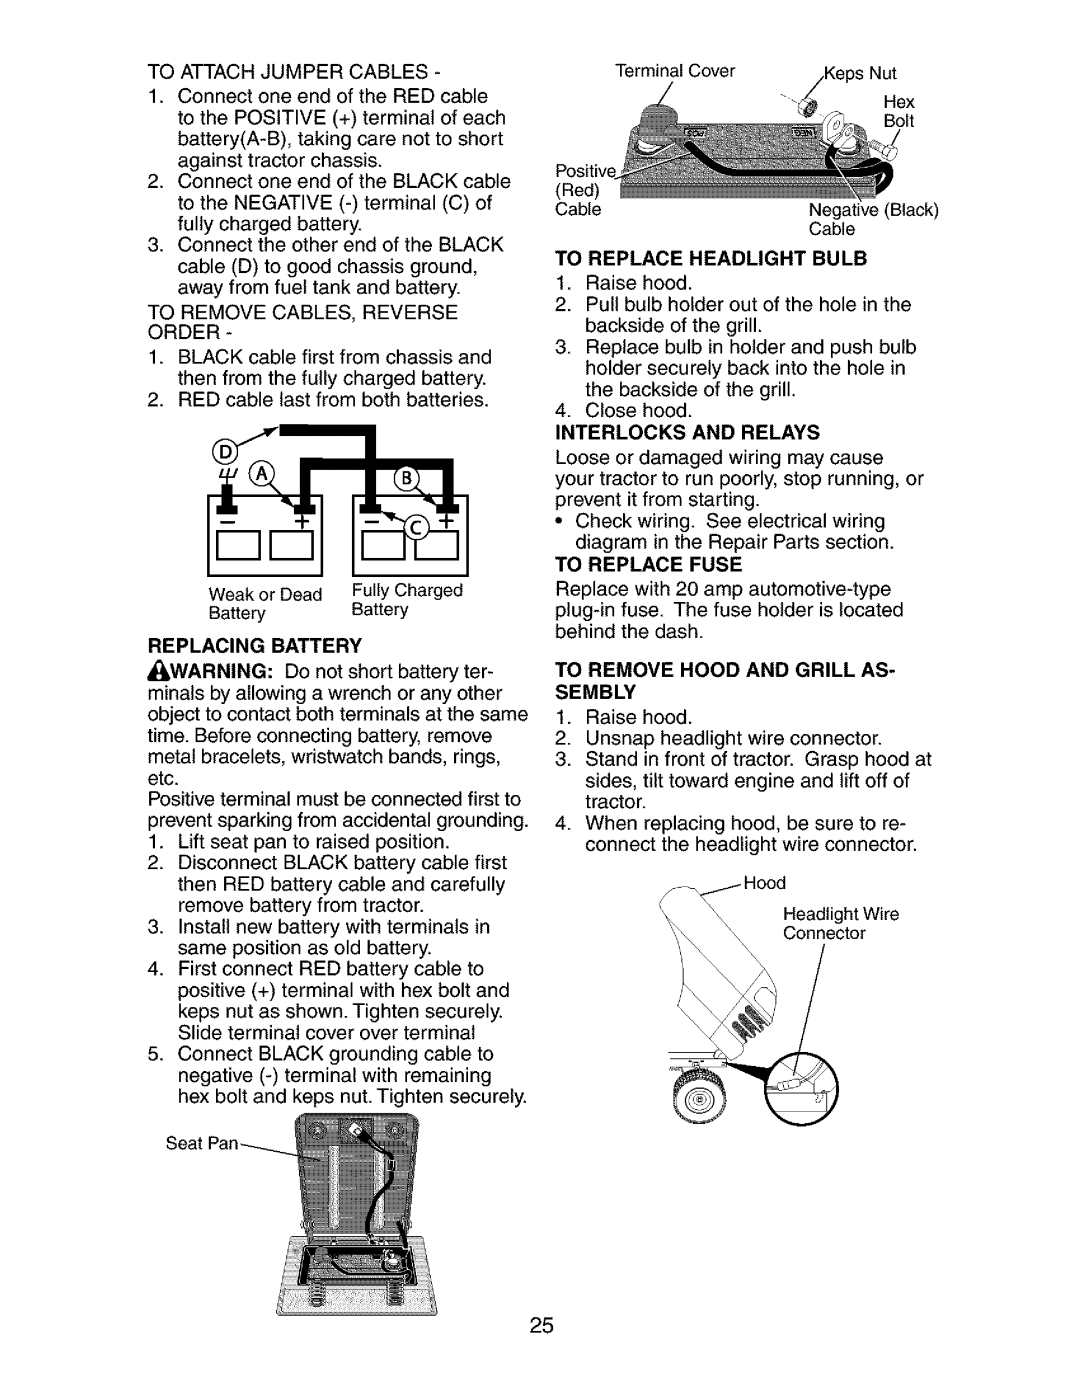 Craftsman 917.273134 owner manual Replacing Battery, To Remove Hood And Grill As- Sembly 